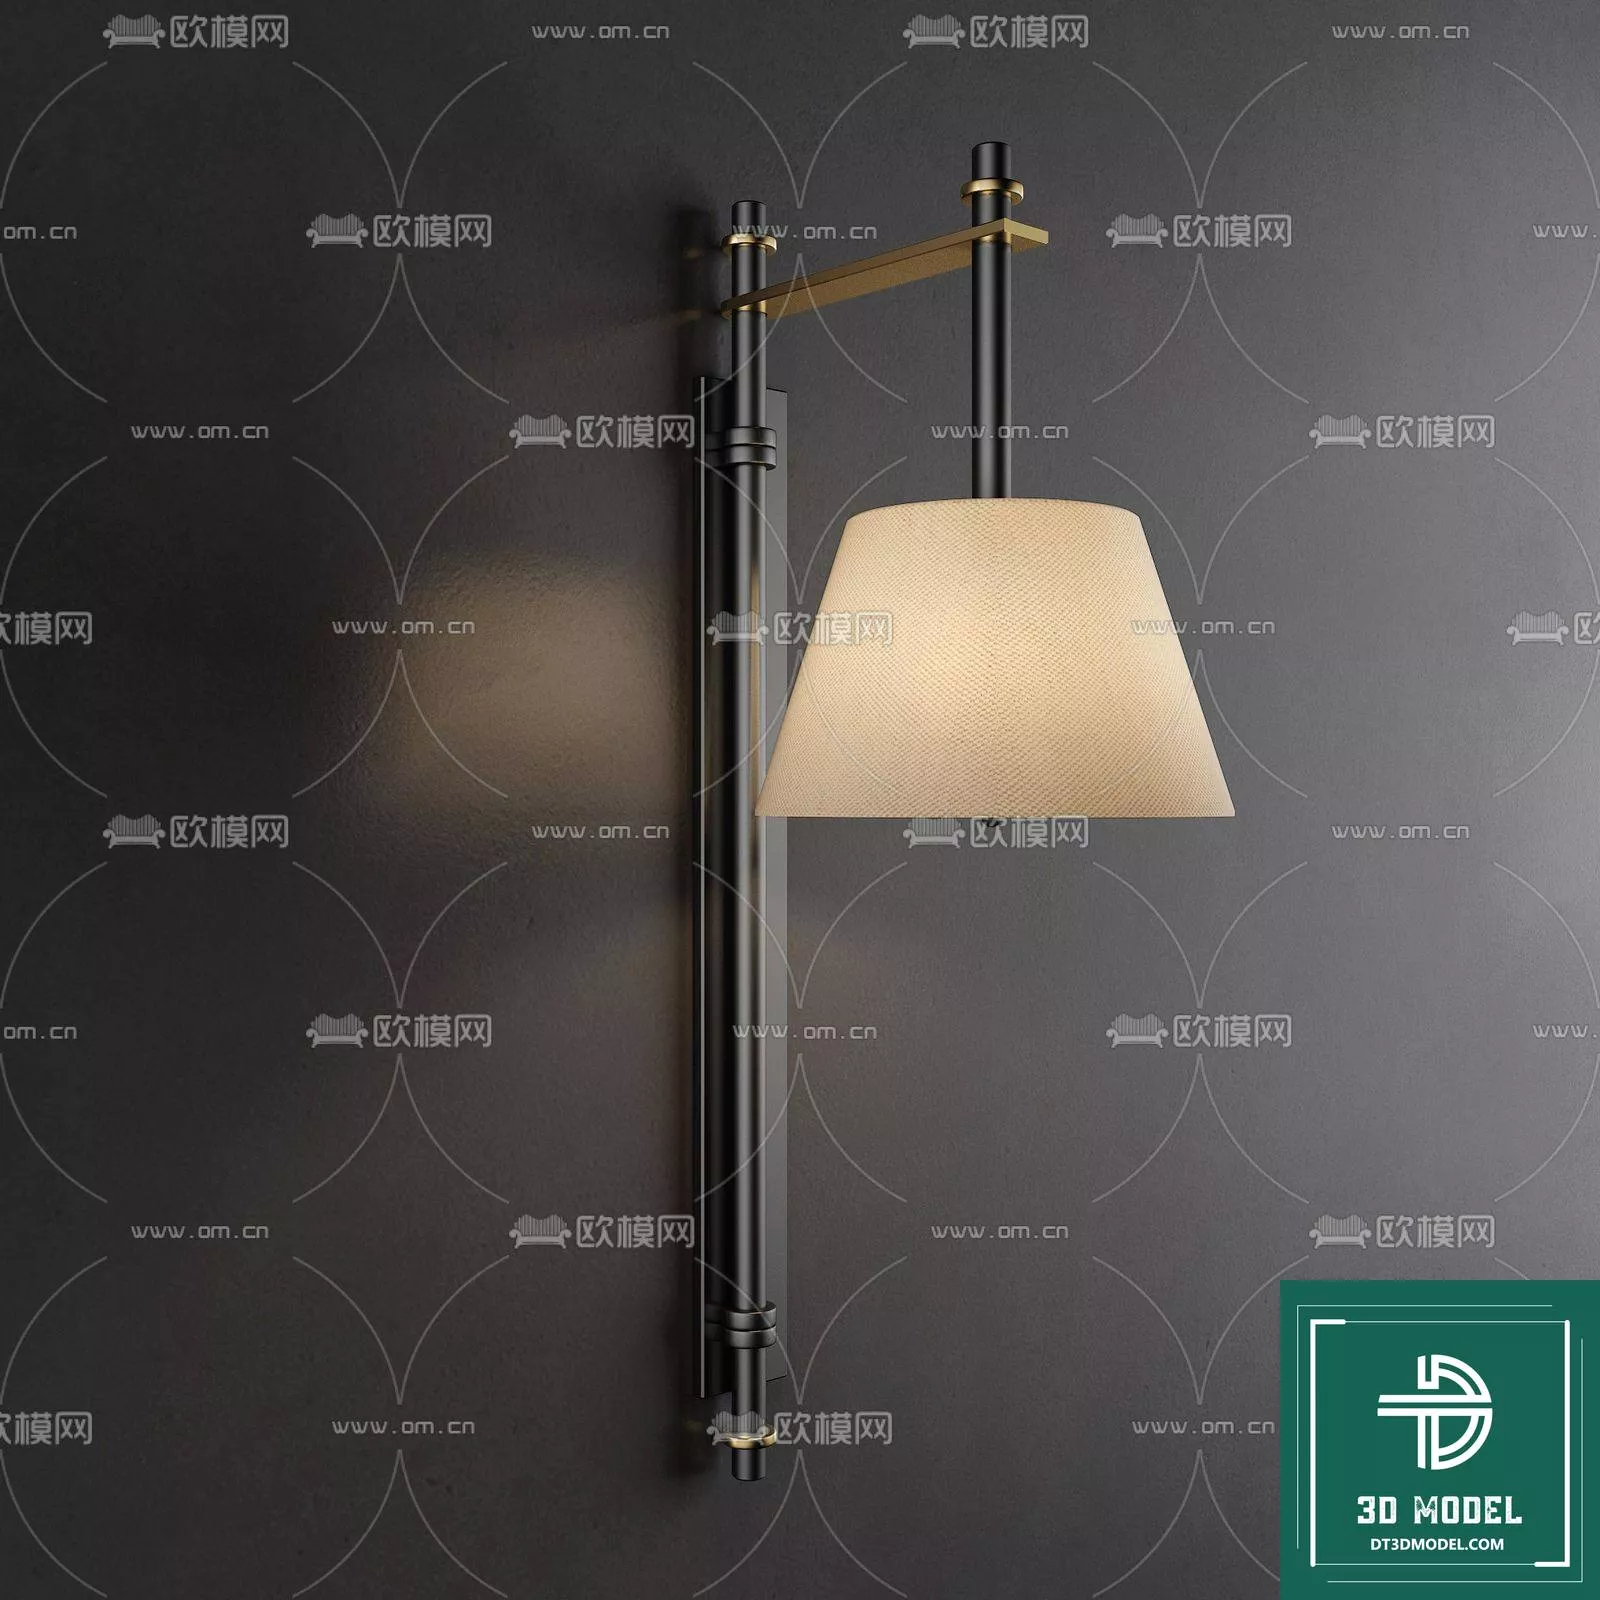 MODERN WALL LAMP - SKETCHUP 3D MODEL - VRAY OR ENSCAPE - ID16070